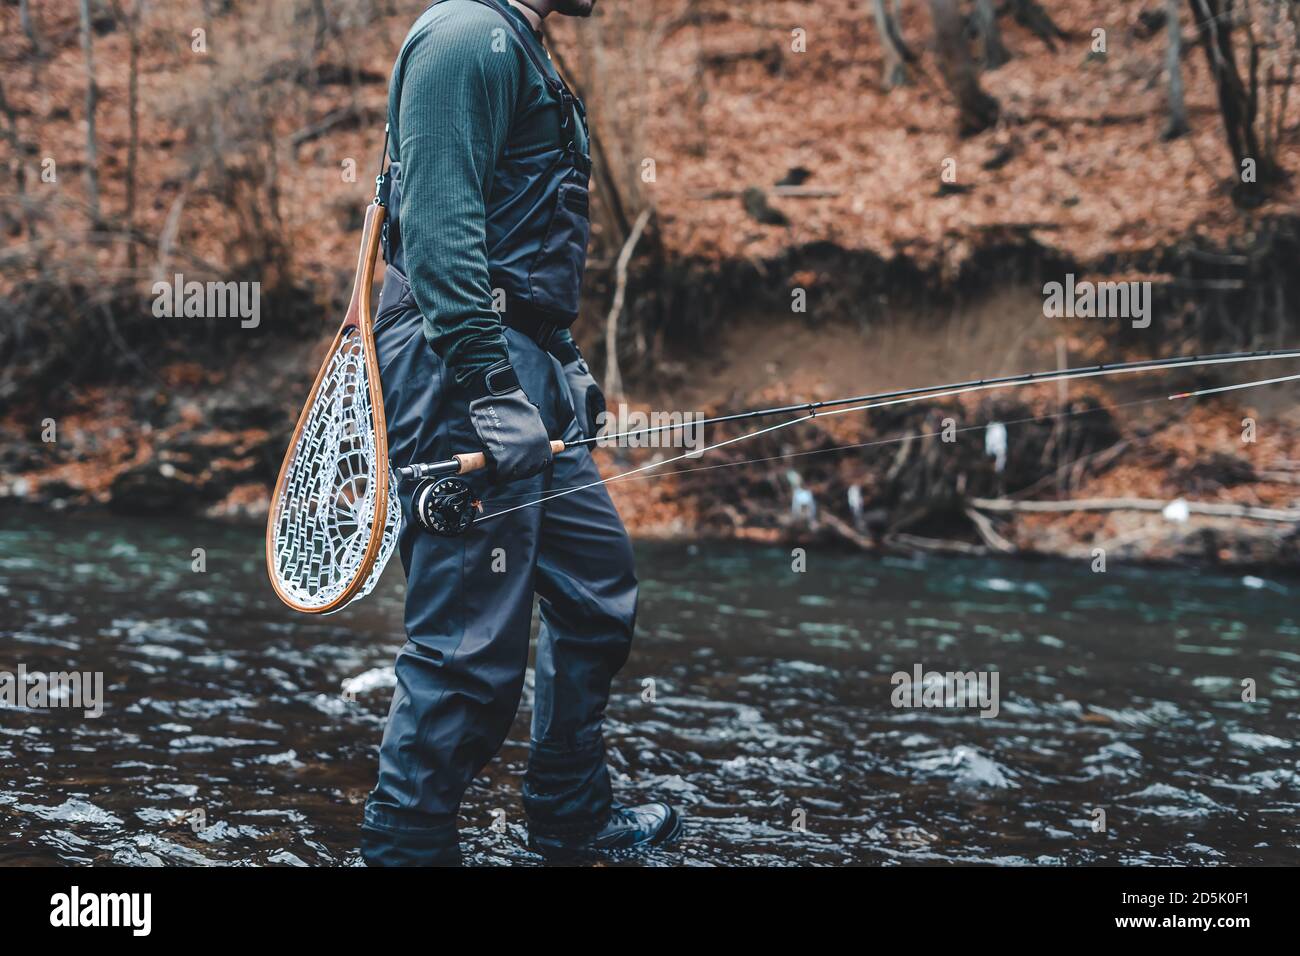 Fisherman fly fishing in river with rod, reel and landing net Stock Photo